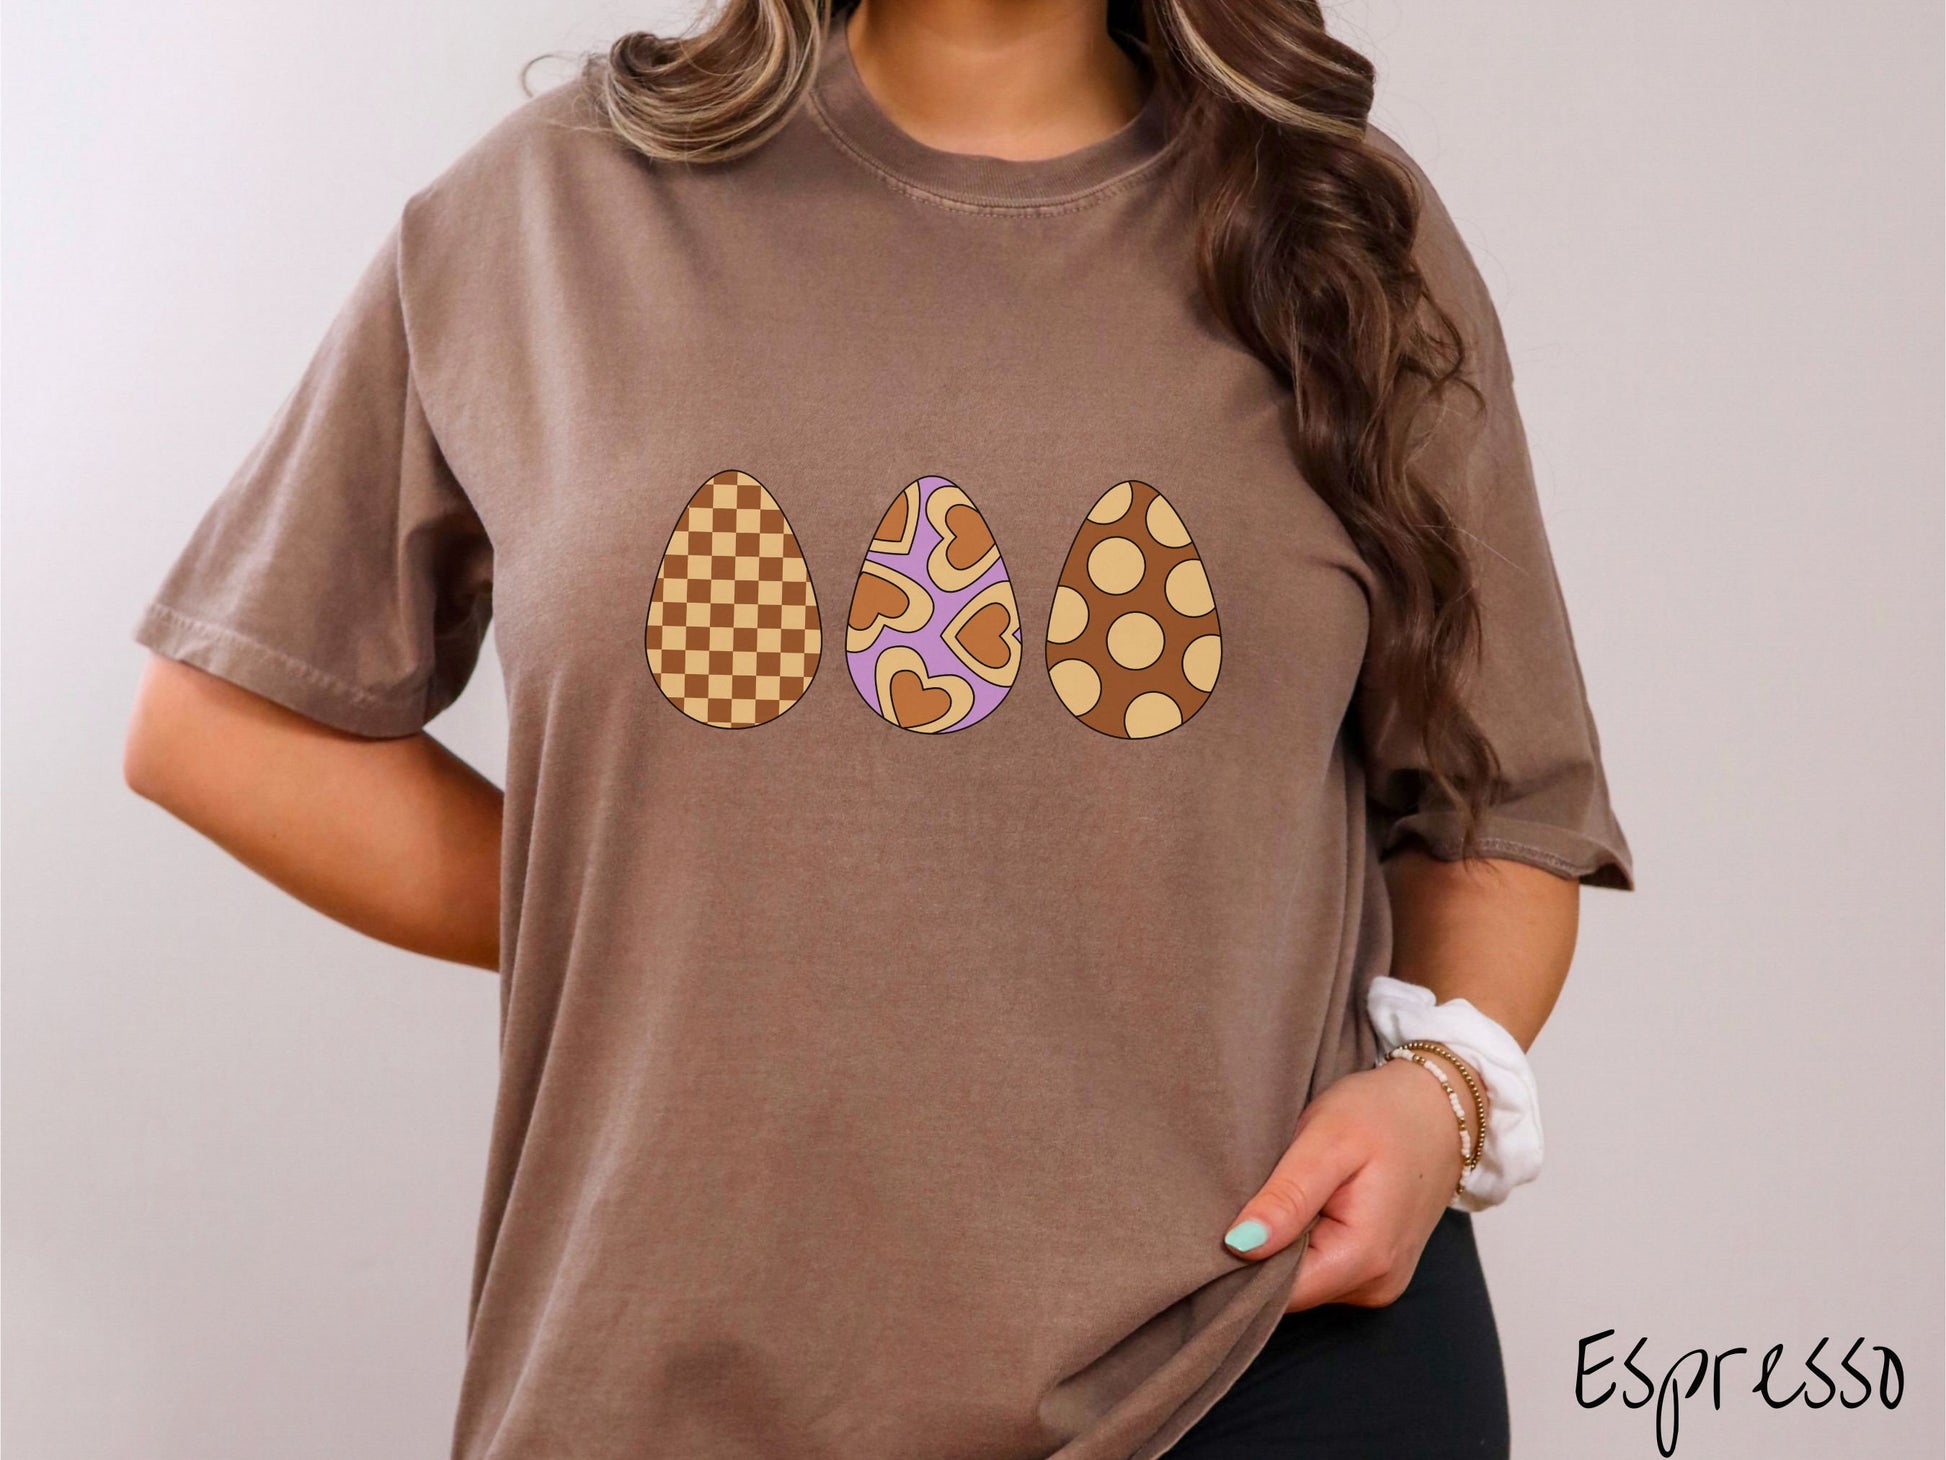 A woman wearing a cute, vintage espresso colored shirt with three Easter eggs. The left egg has a light yellow and brown checkerboard pattern, the middle is purple with light yellow brown hearts, and the right is brown with light yellow circles.